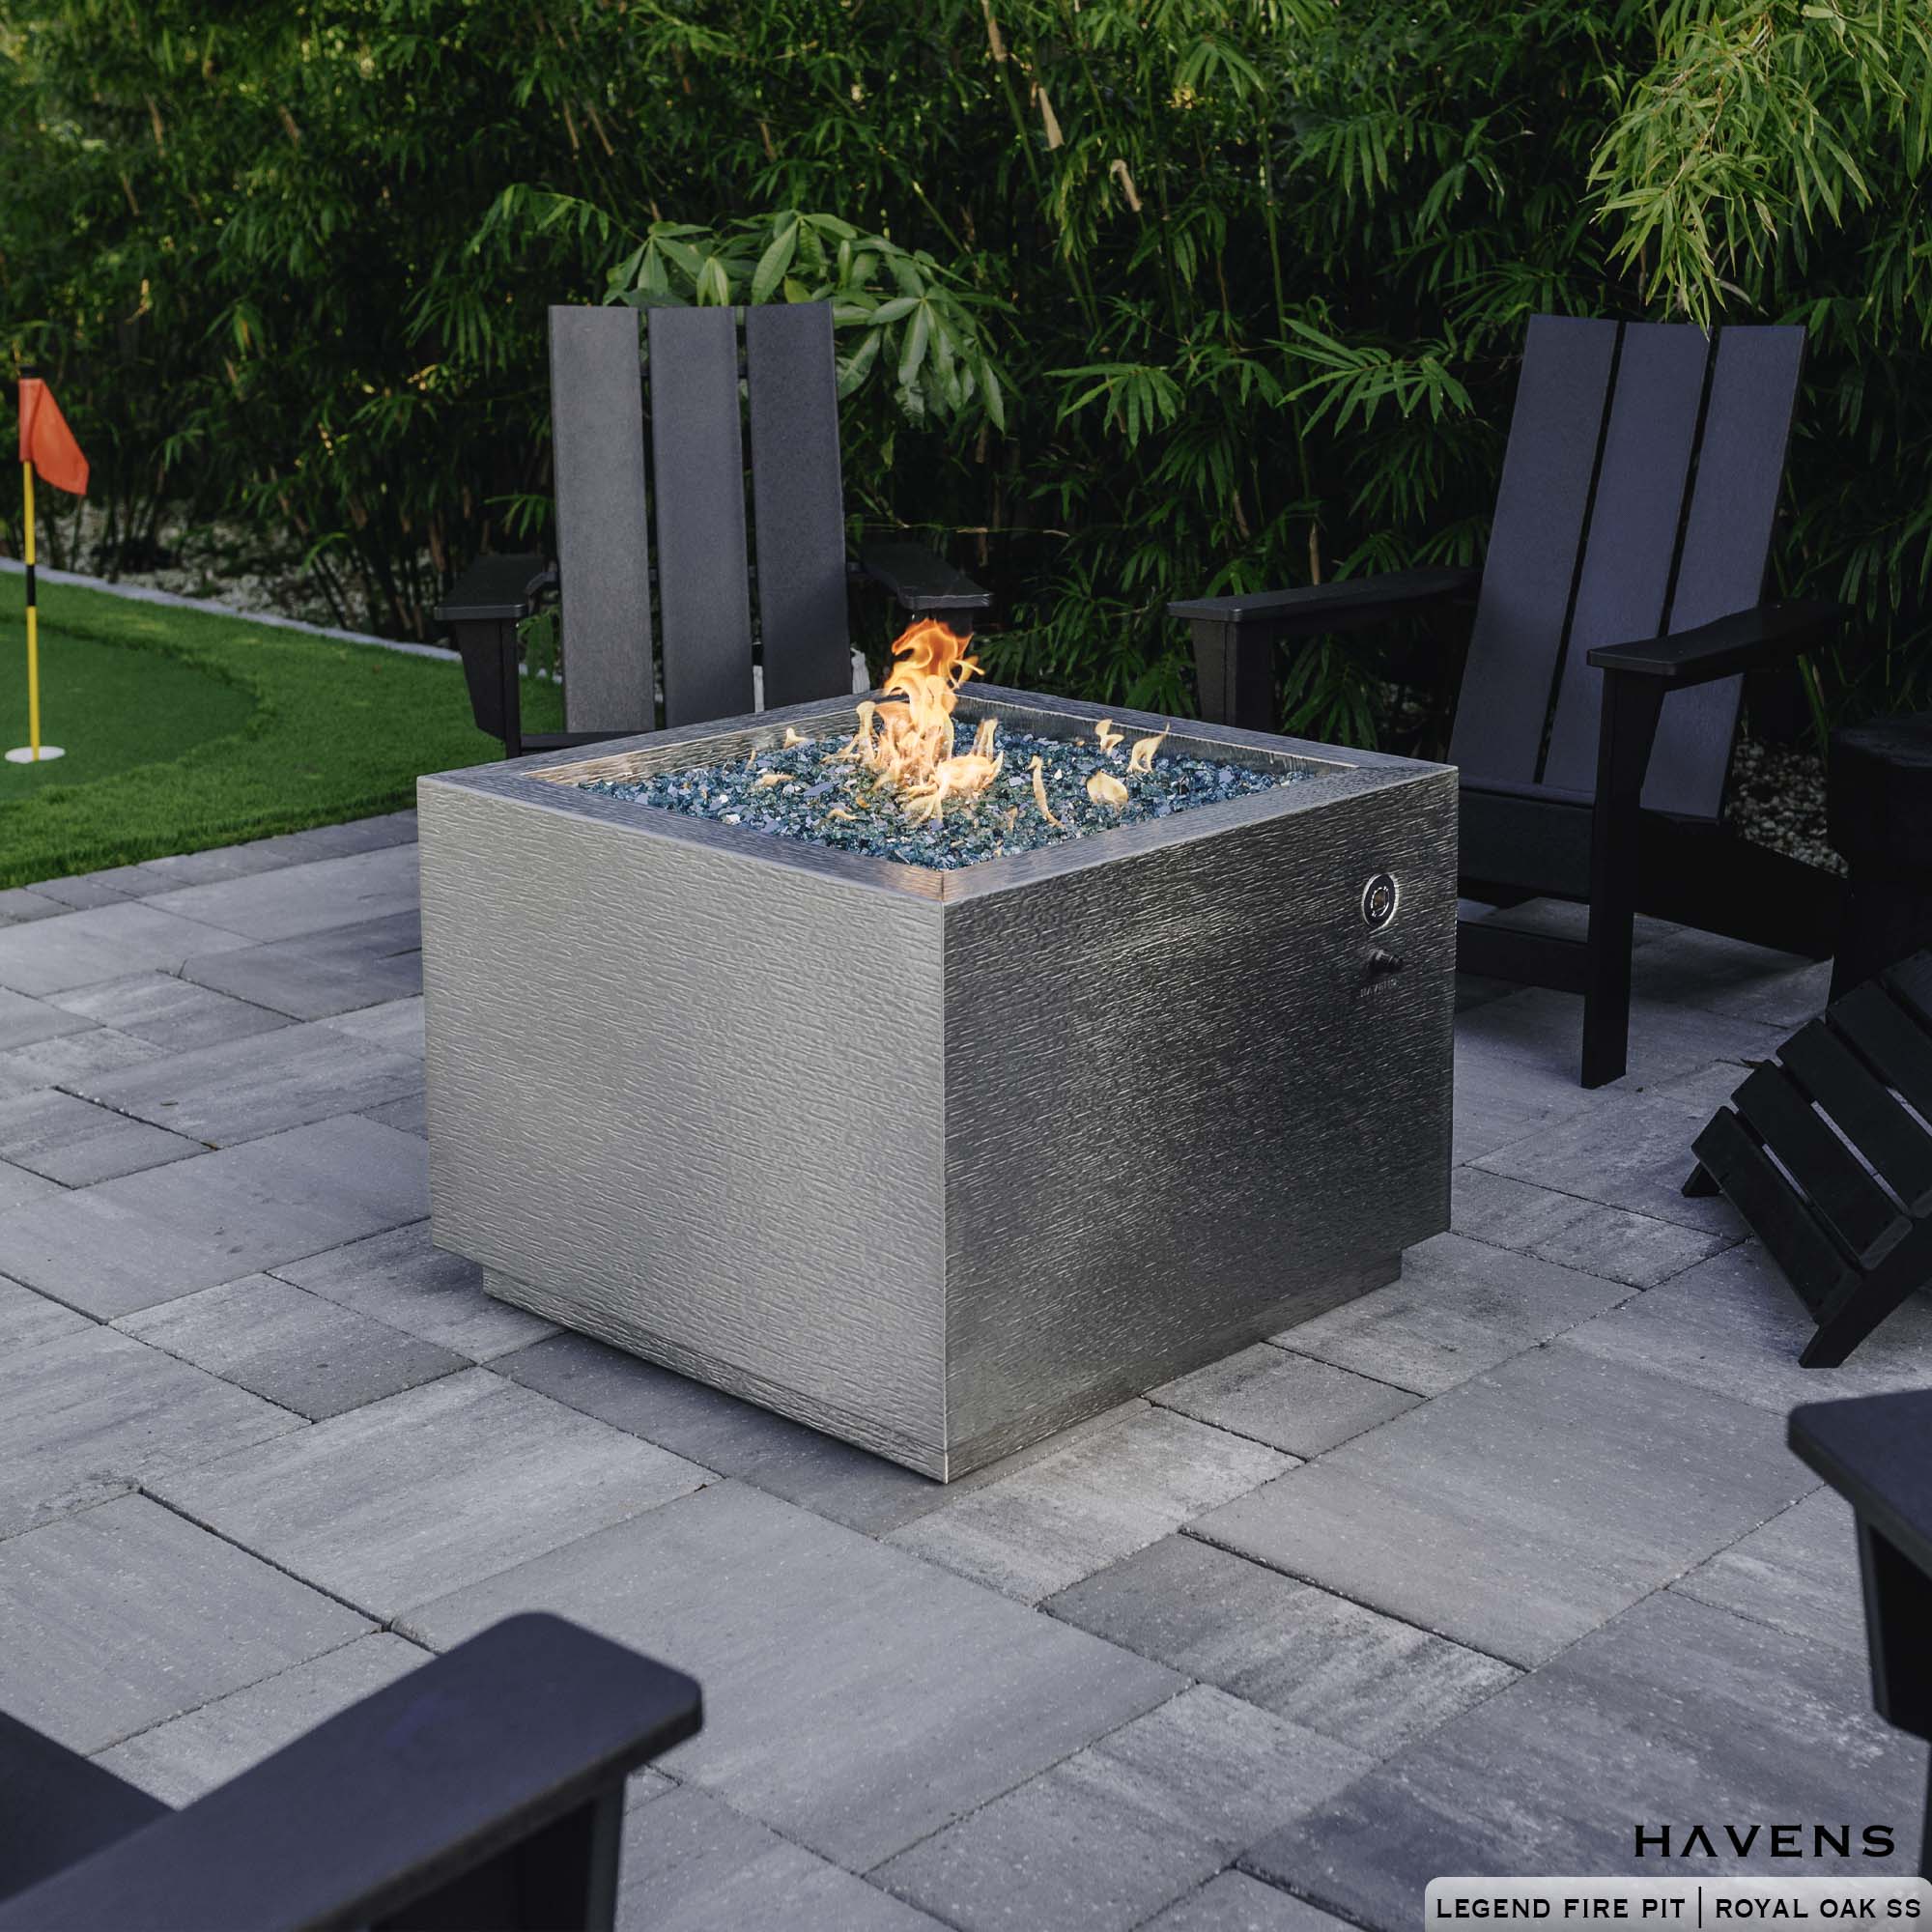 Legend Fire Pit - Stainless